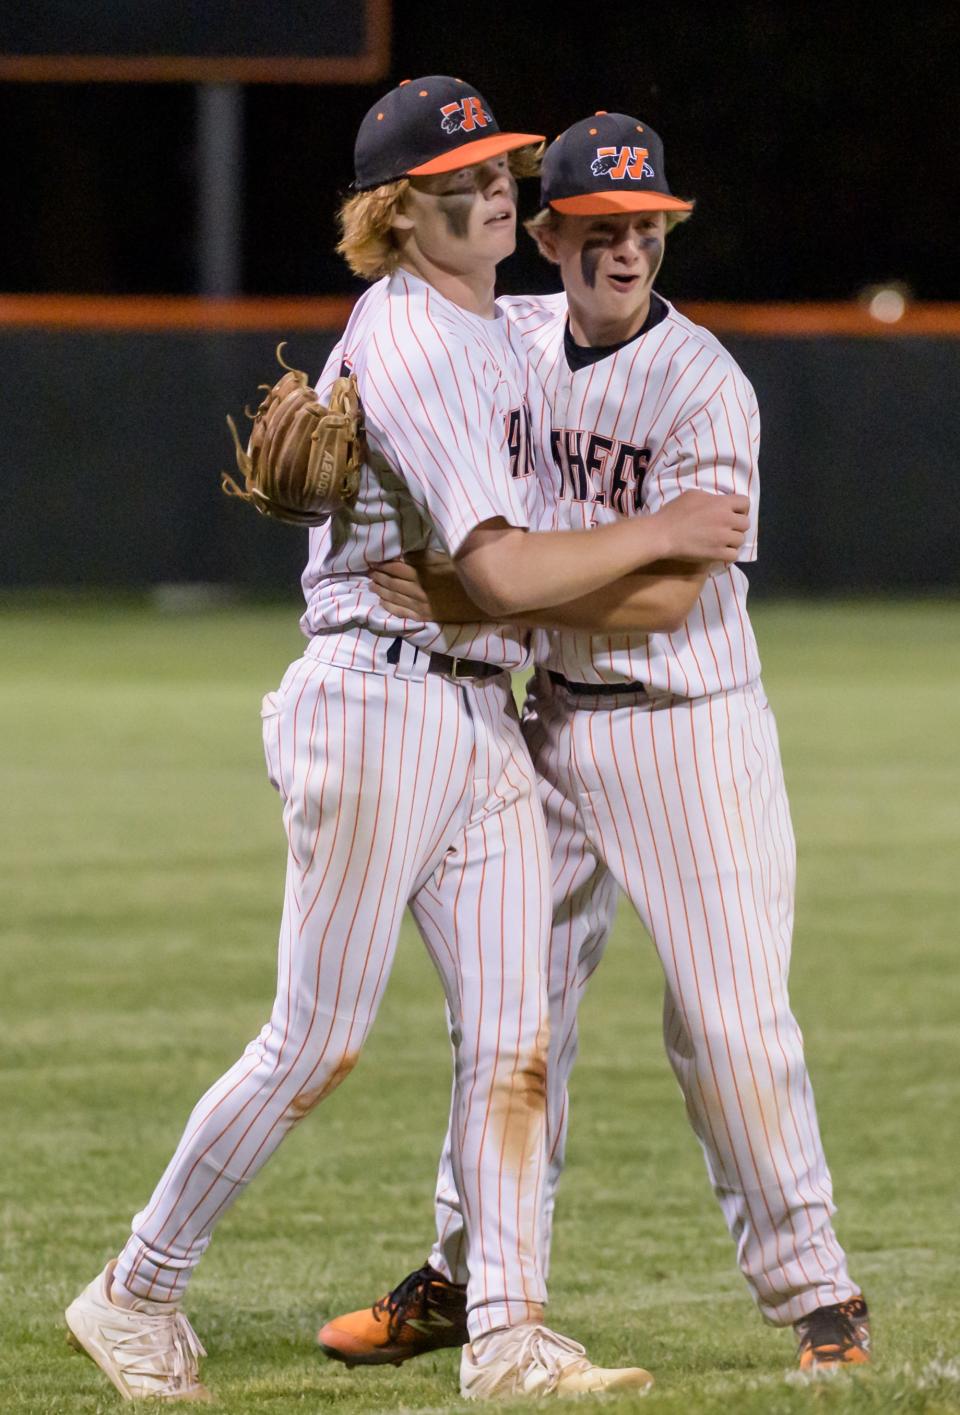 Washington's Easton Harris, left, and Jake Stewart celebrate their 3-2 victory over Galesburg in the Class 3A baseball sectional semifinal Wednesday, June 1, 2022 at Brian Wisher Field in Washington. The Panthers will face Morton for the sectional title at 11 a.m. Saturday in Washington.